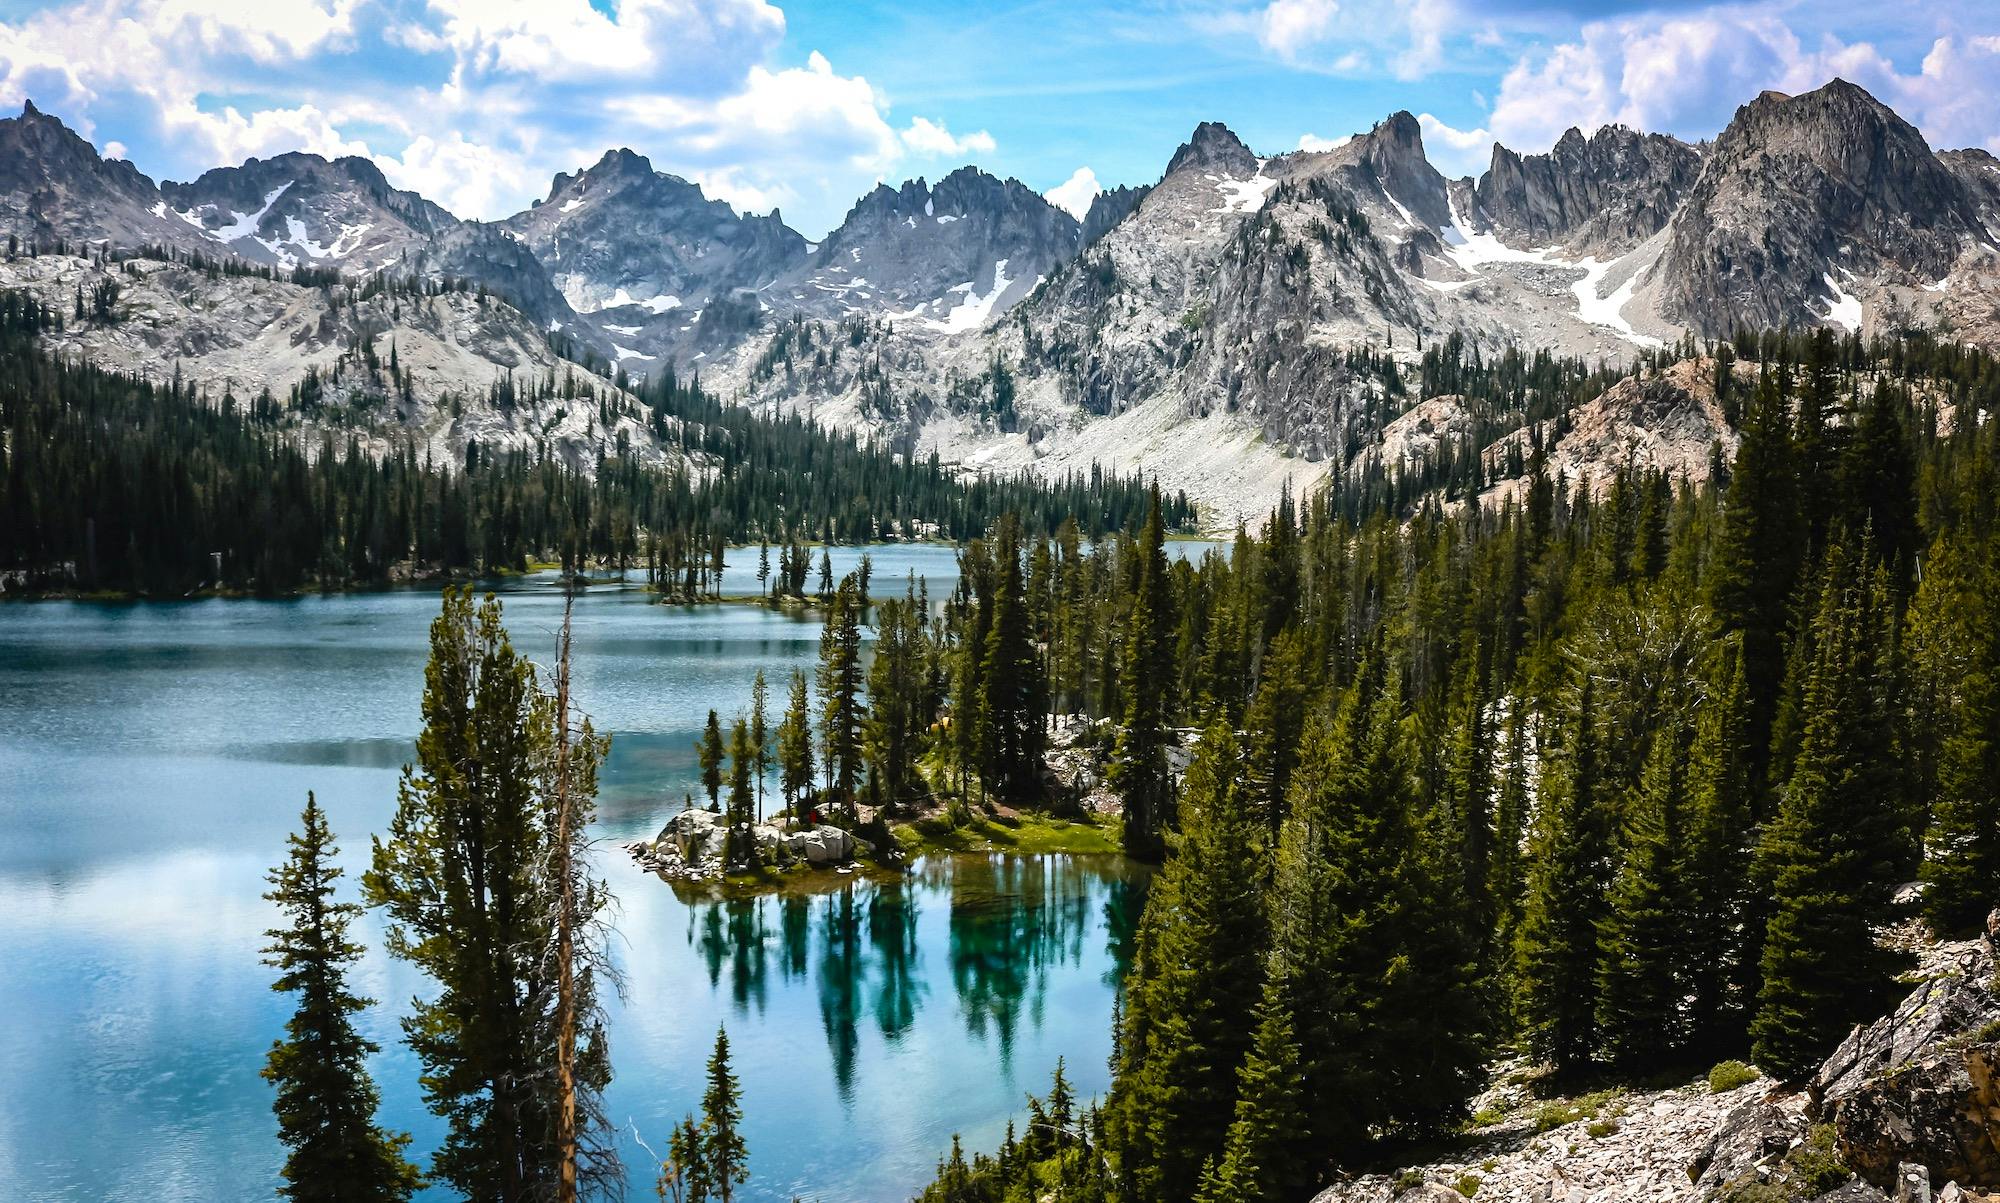 An alpine lake and jagged peaks of the Sawtooths